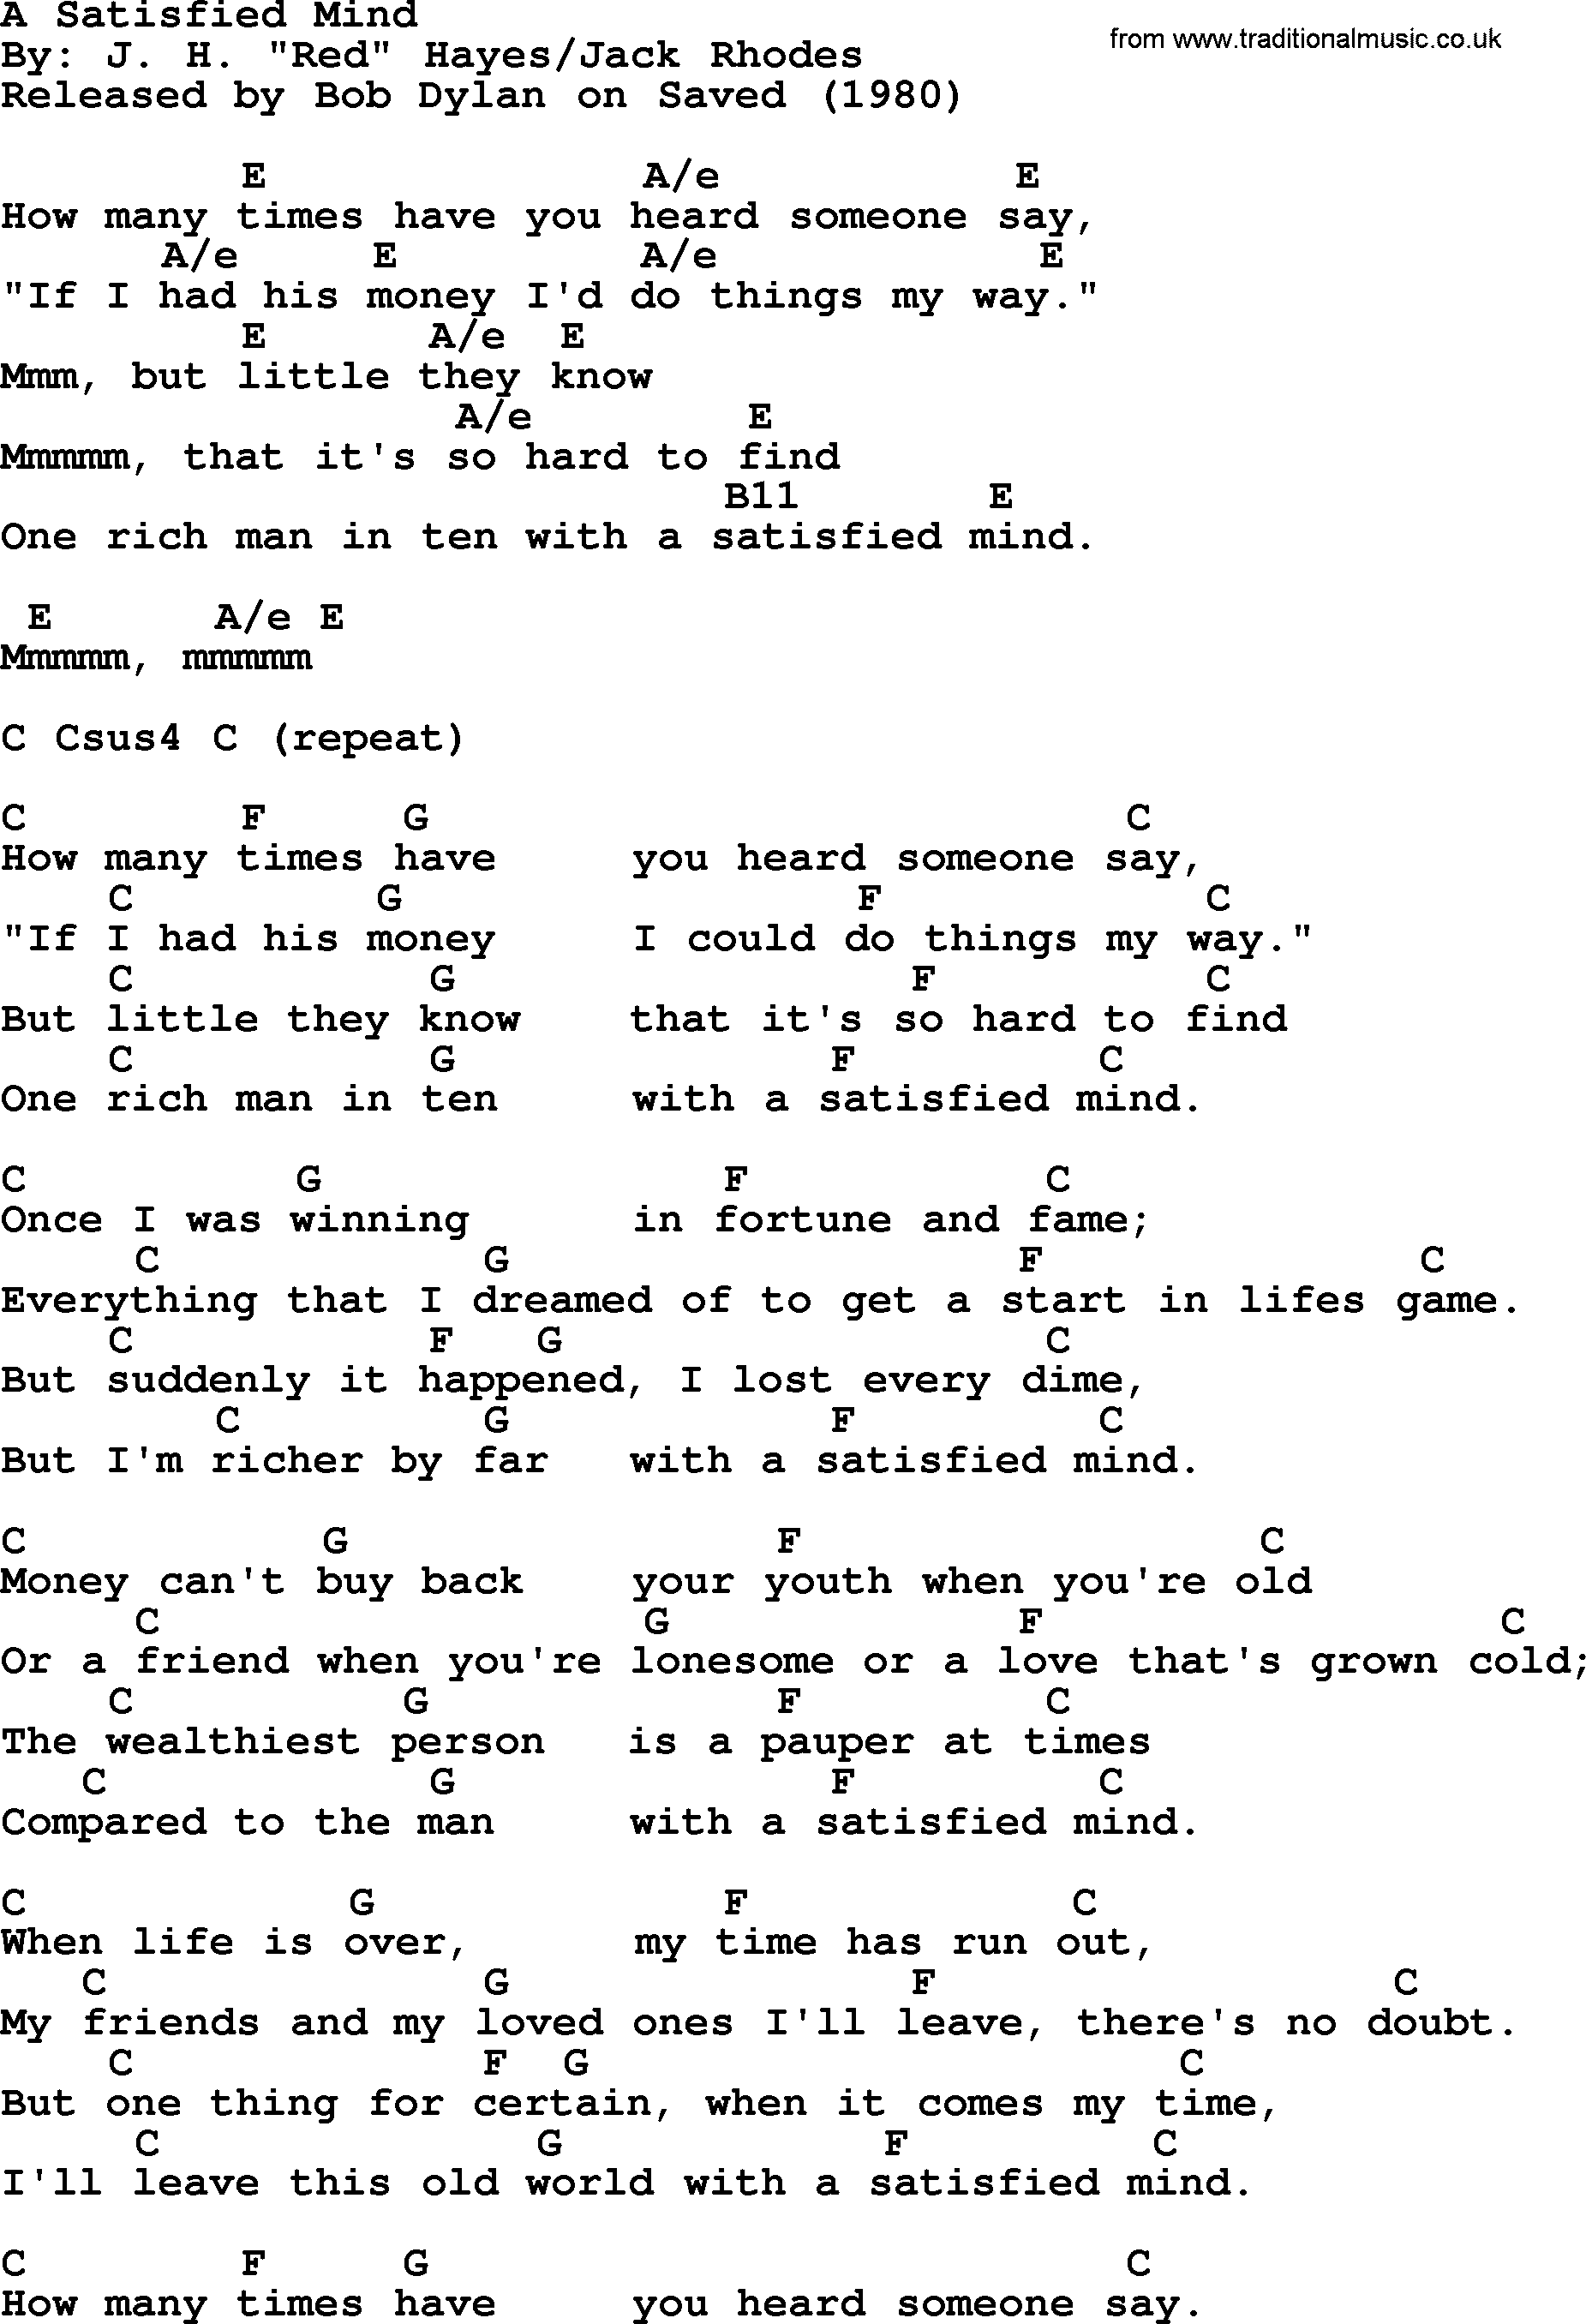 Bob Dylan song, lyrics with chords - A Satisfied Mind